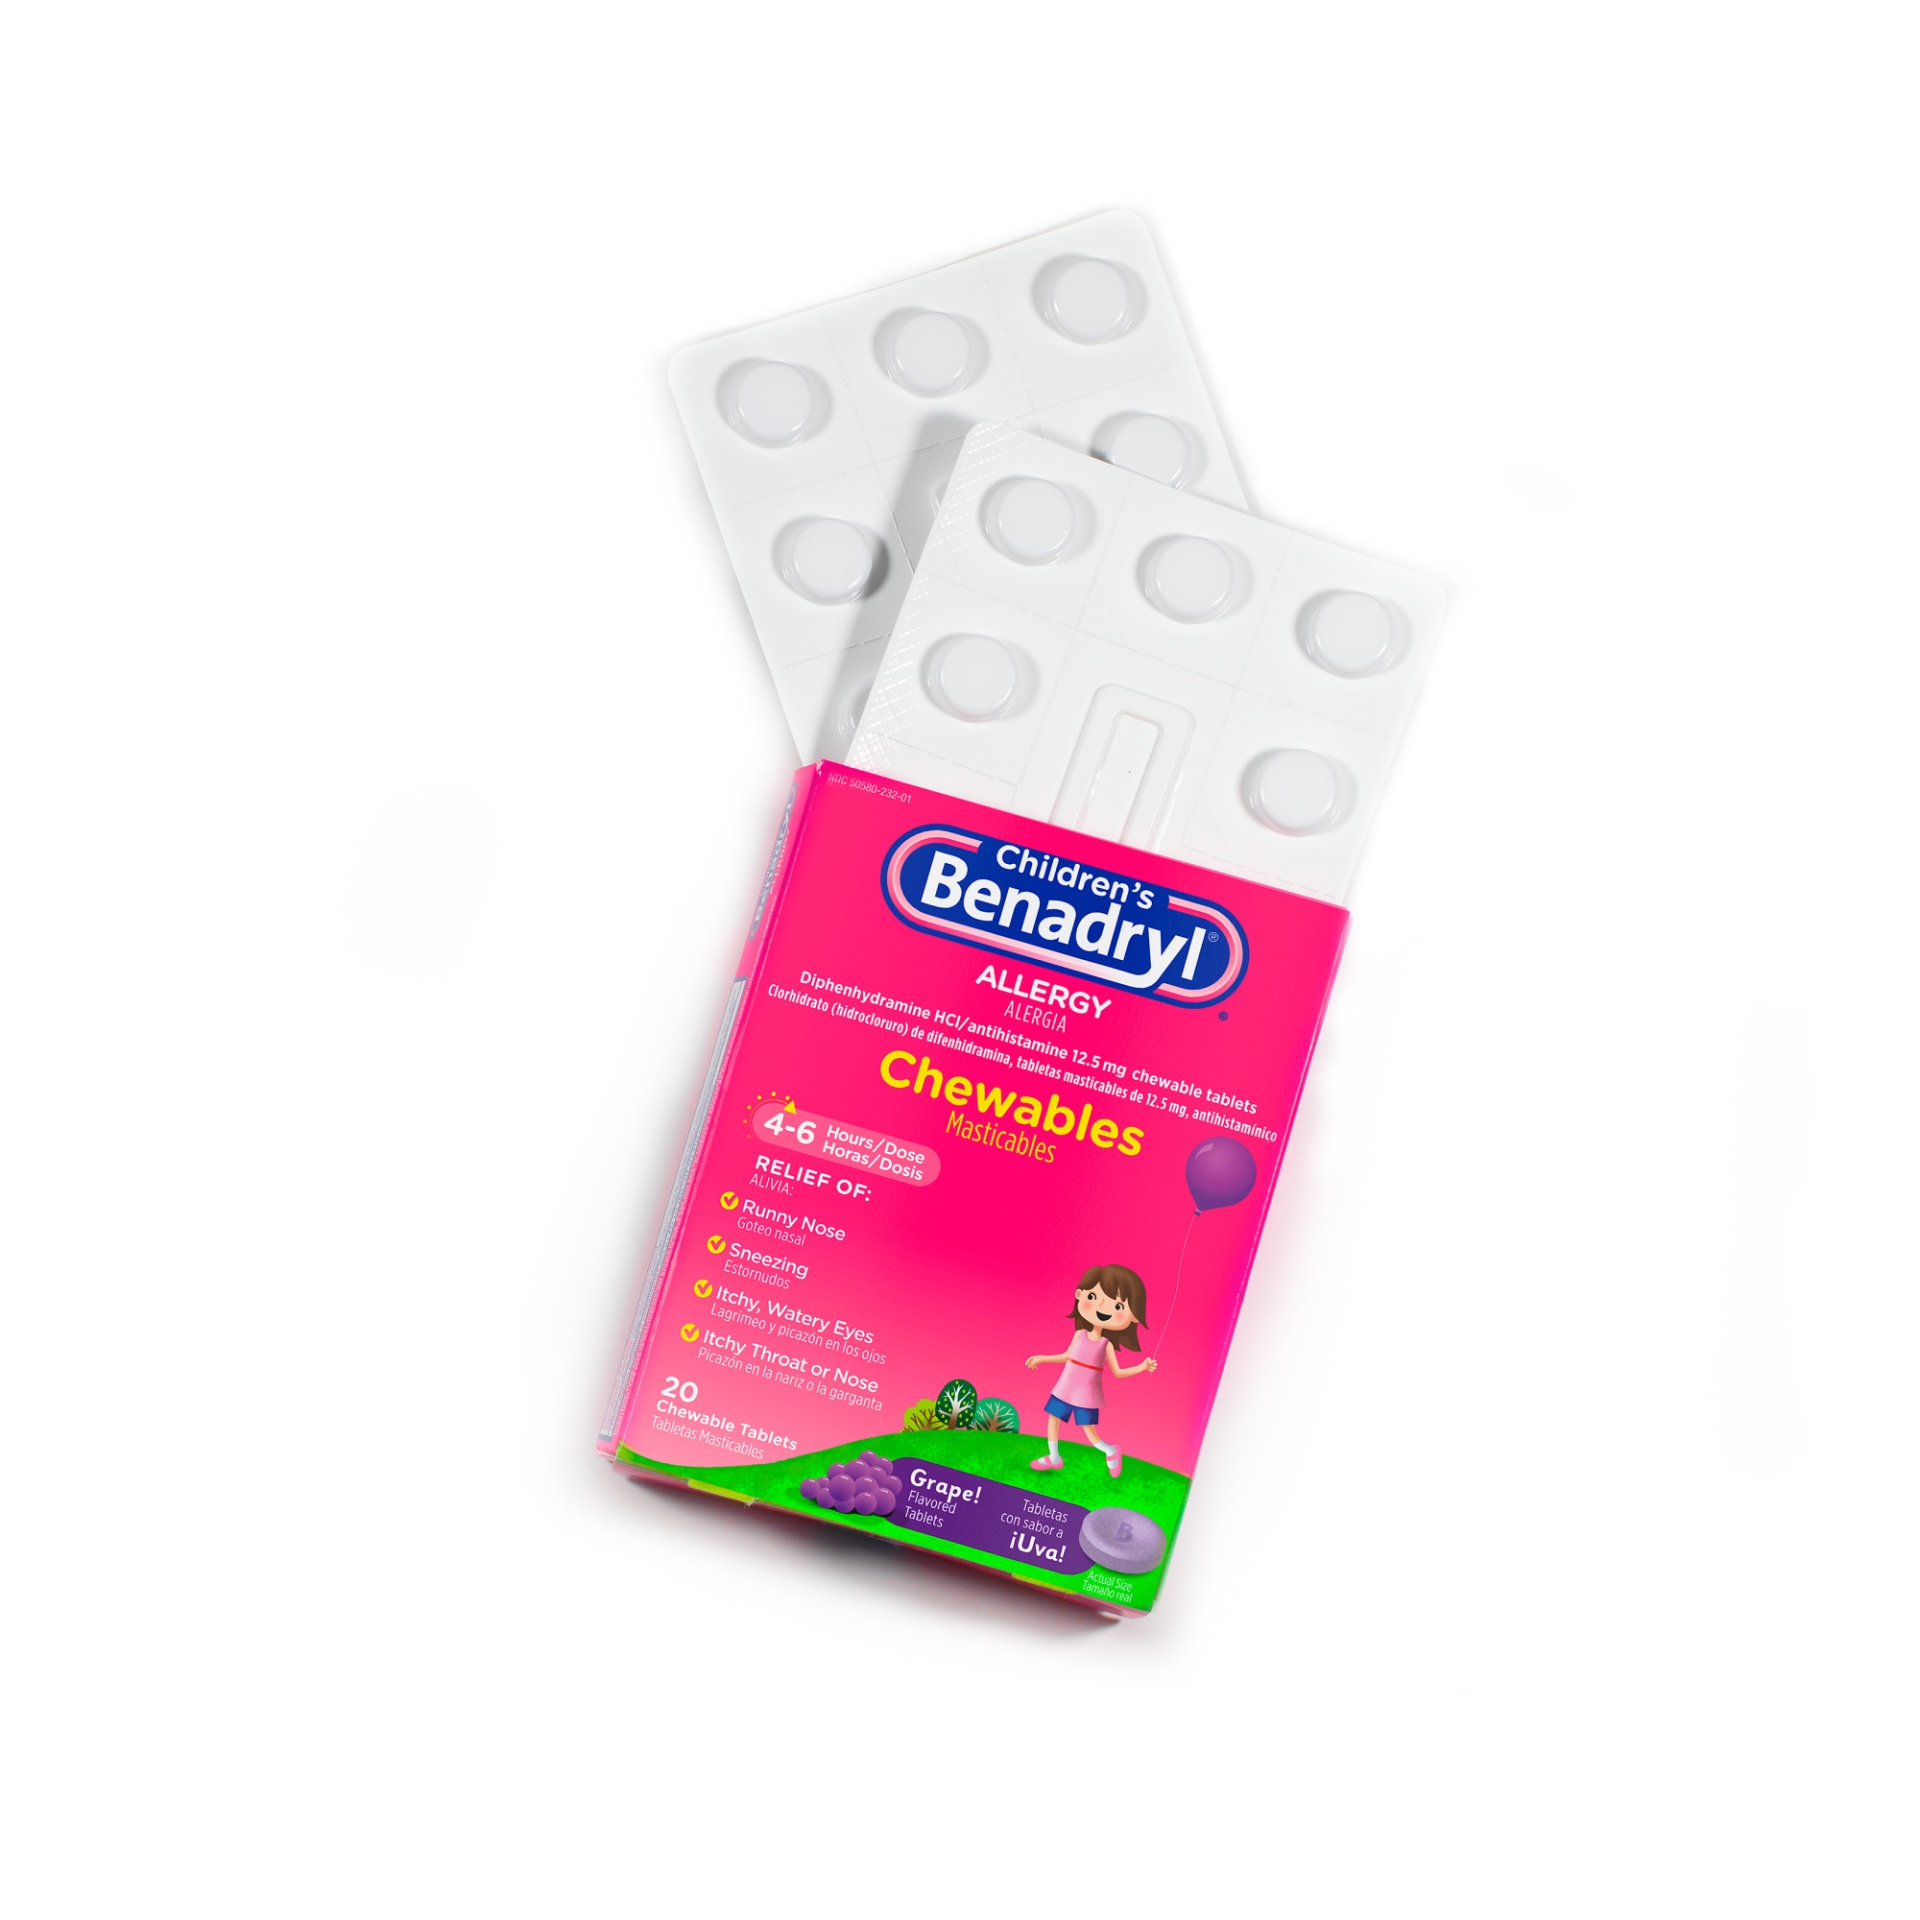 slide 1 of 5, Benadryl Allergy Chewables with Diphenhydramine HCl, Antihistamine Chewable Tablets For Relief of Allergy Symptoms Like Sneezing, Itchy Eyes, & More, Grape Flavor, 20 ct